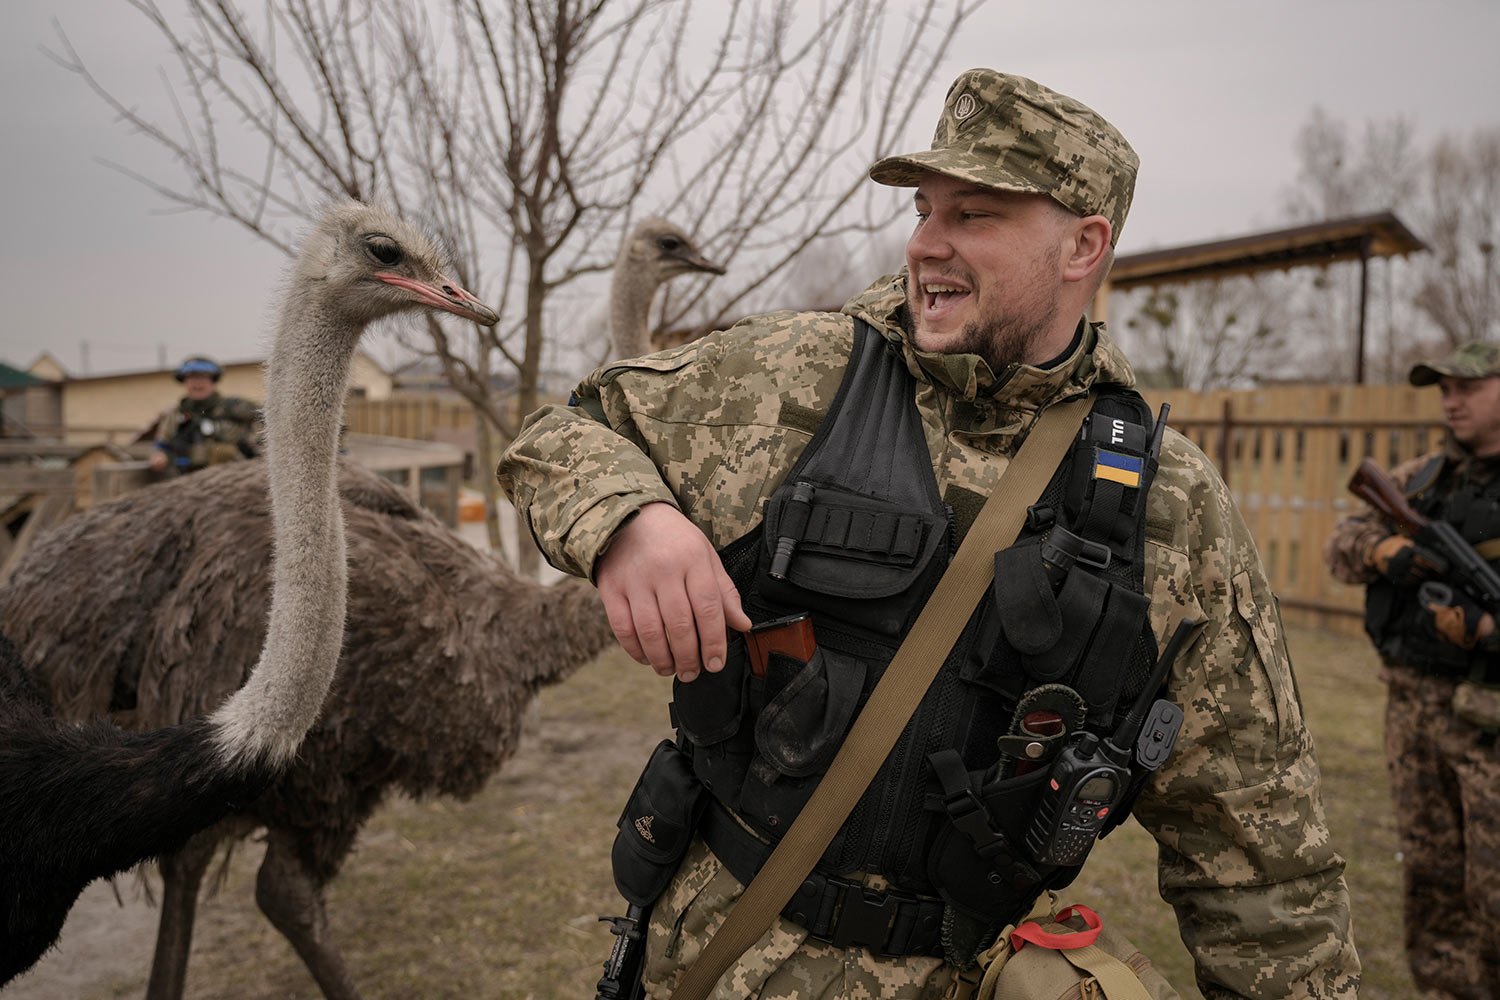  A Ukrainian serviceman tries to avoid being bitten by an ostrich at a heavily damaged private zoo as soldiers and volunteers attempted to evacuate the surviving animals to safety in the village of Yasnohorodka, on the outskirts of Kyiv, Ukraine, Wed